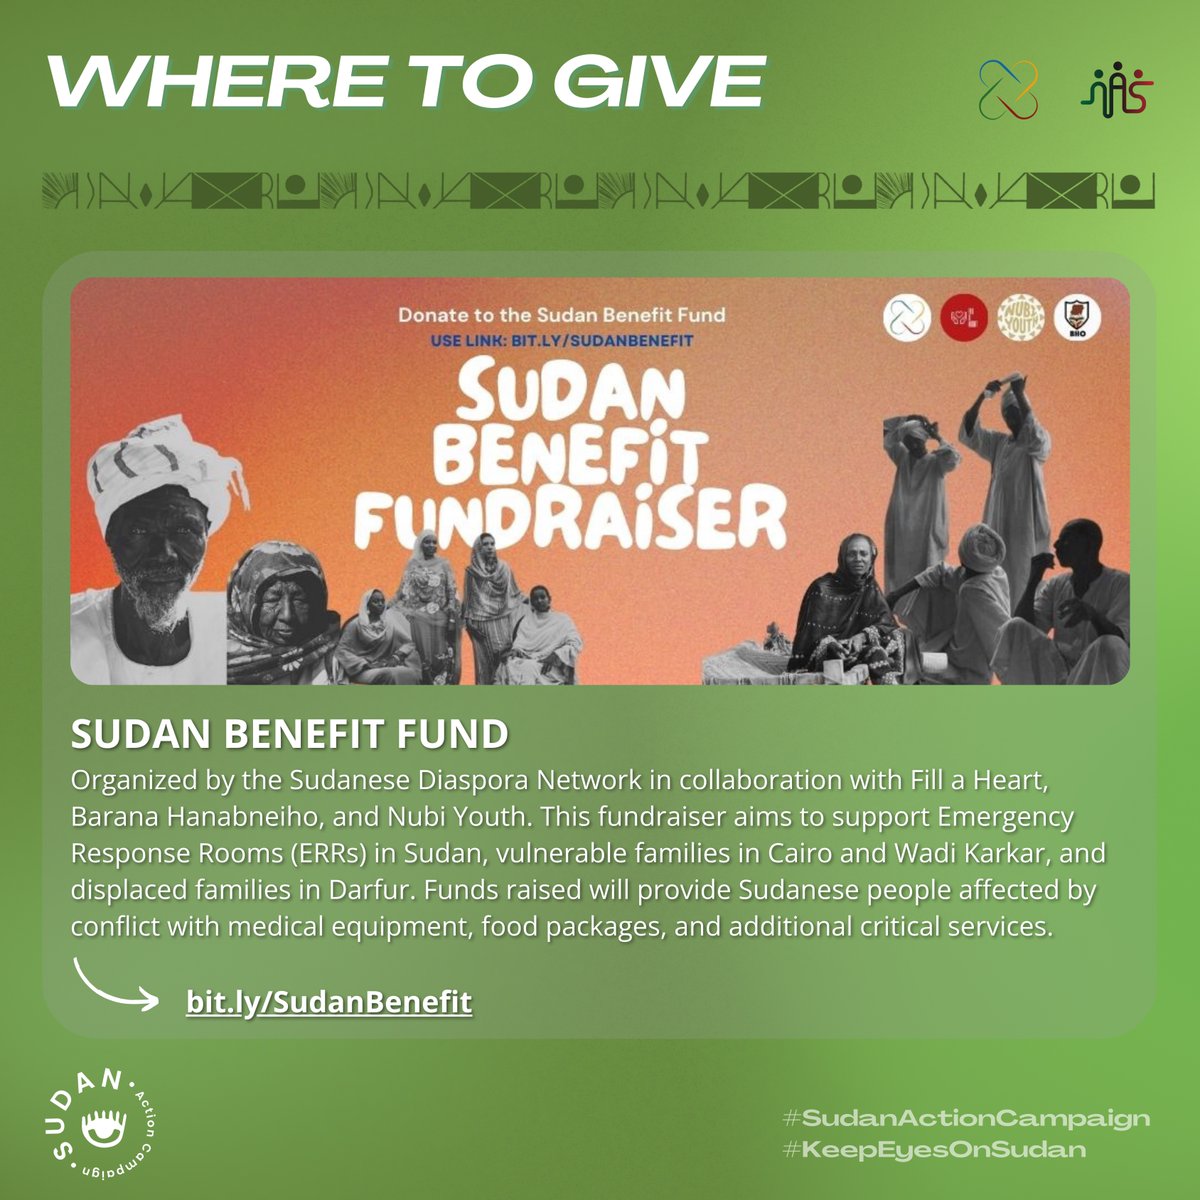 Donate to Sudanese-Led & Run Initiatives (1/3)

For a comprehensive list of initiatives and family fundraisers to support, please visit nasalsudan.com/donate

#KeepEyesOnSudan #SudanActionCampaign

#EyesOnDarfur #TalkAboutSudan #SudanUpdates #SaveSudan